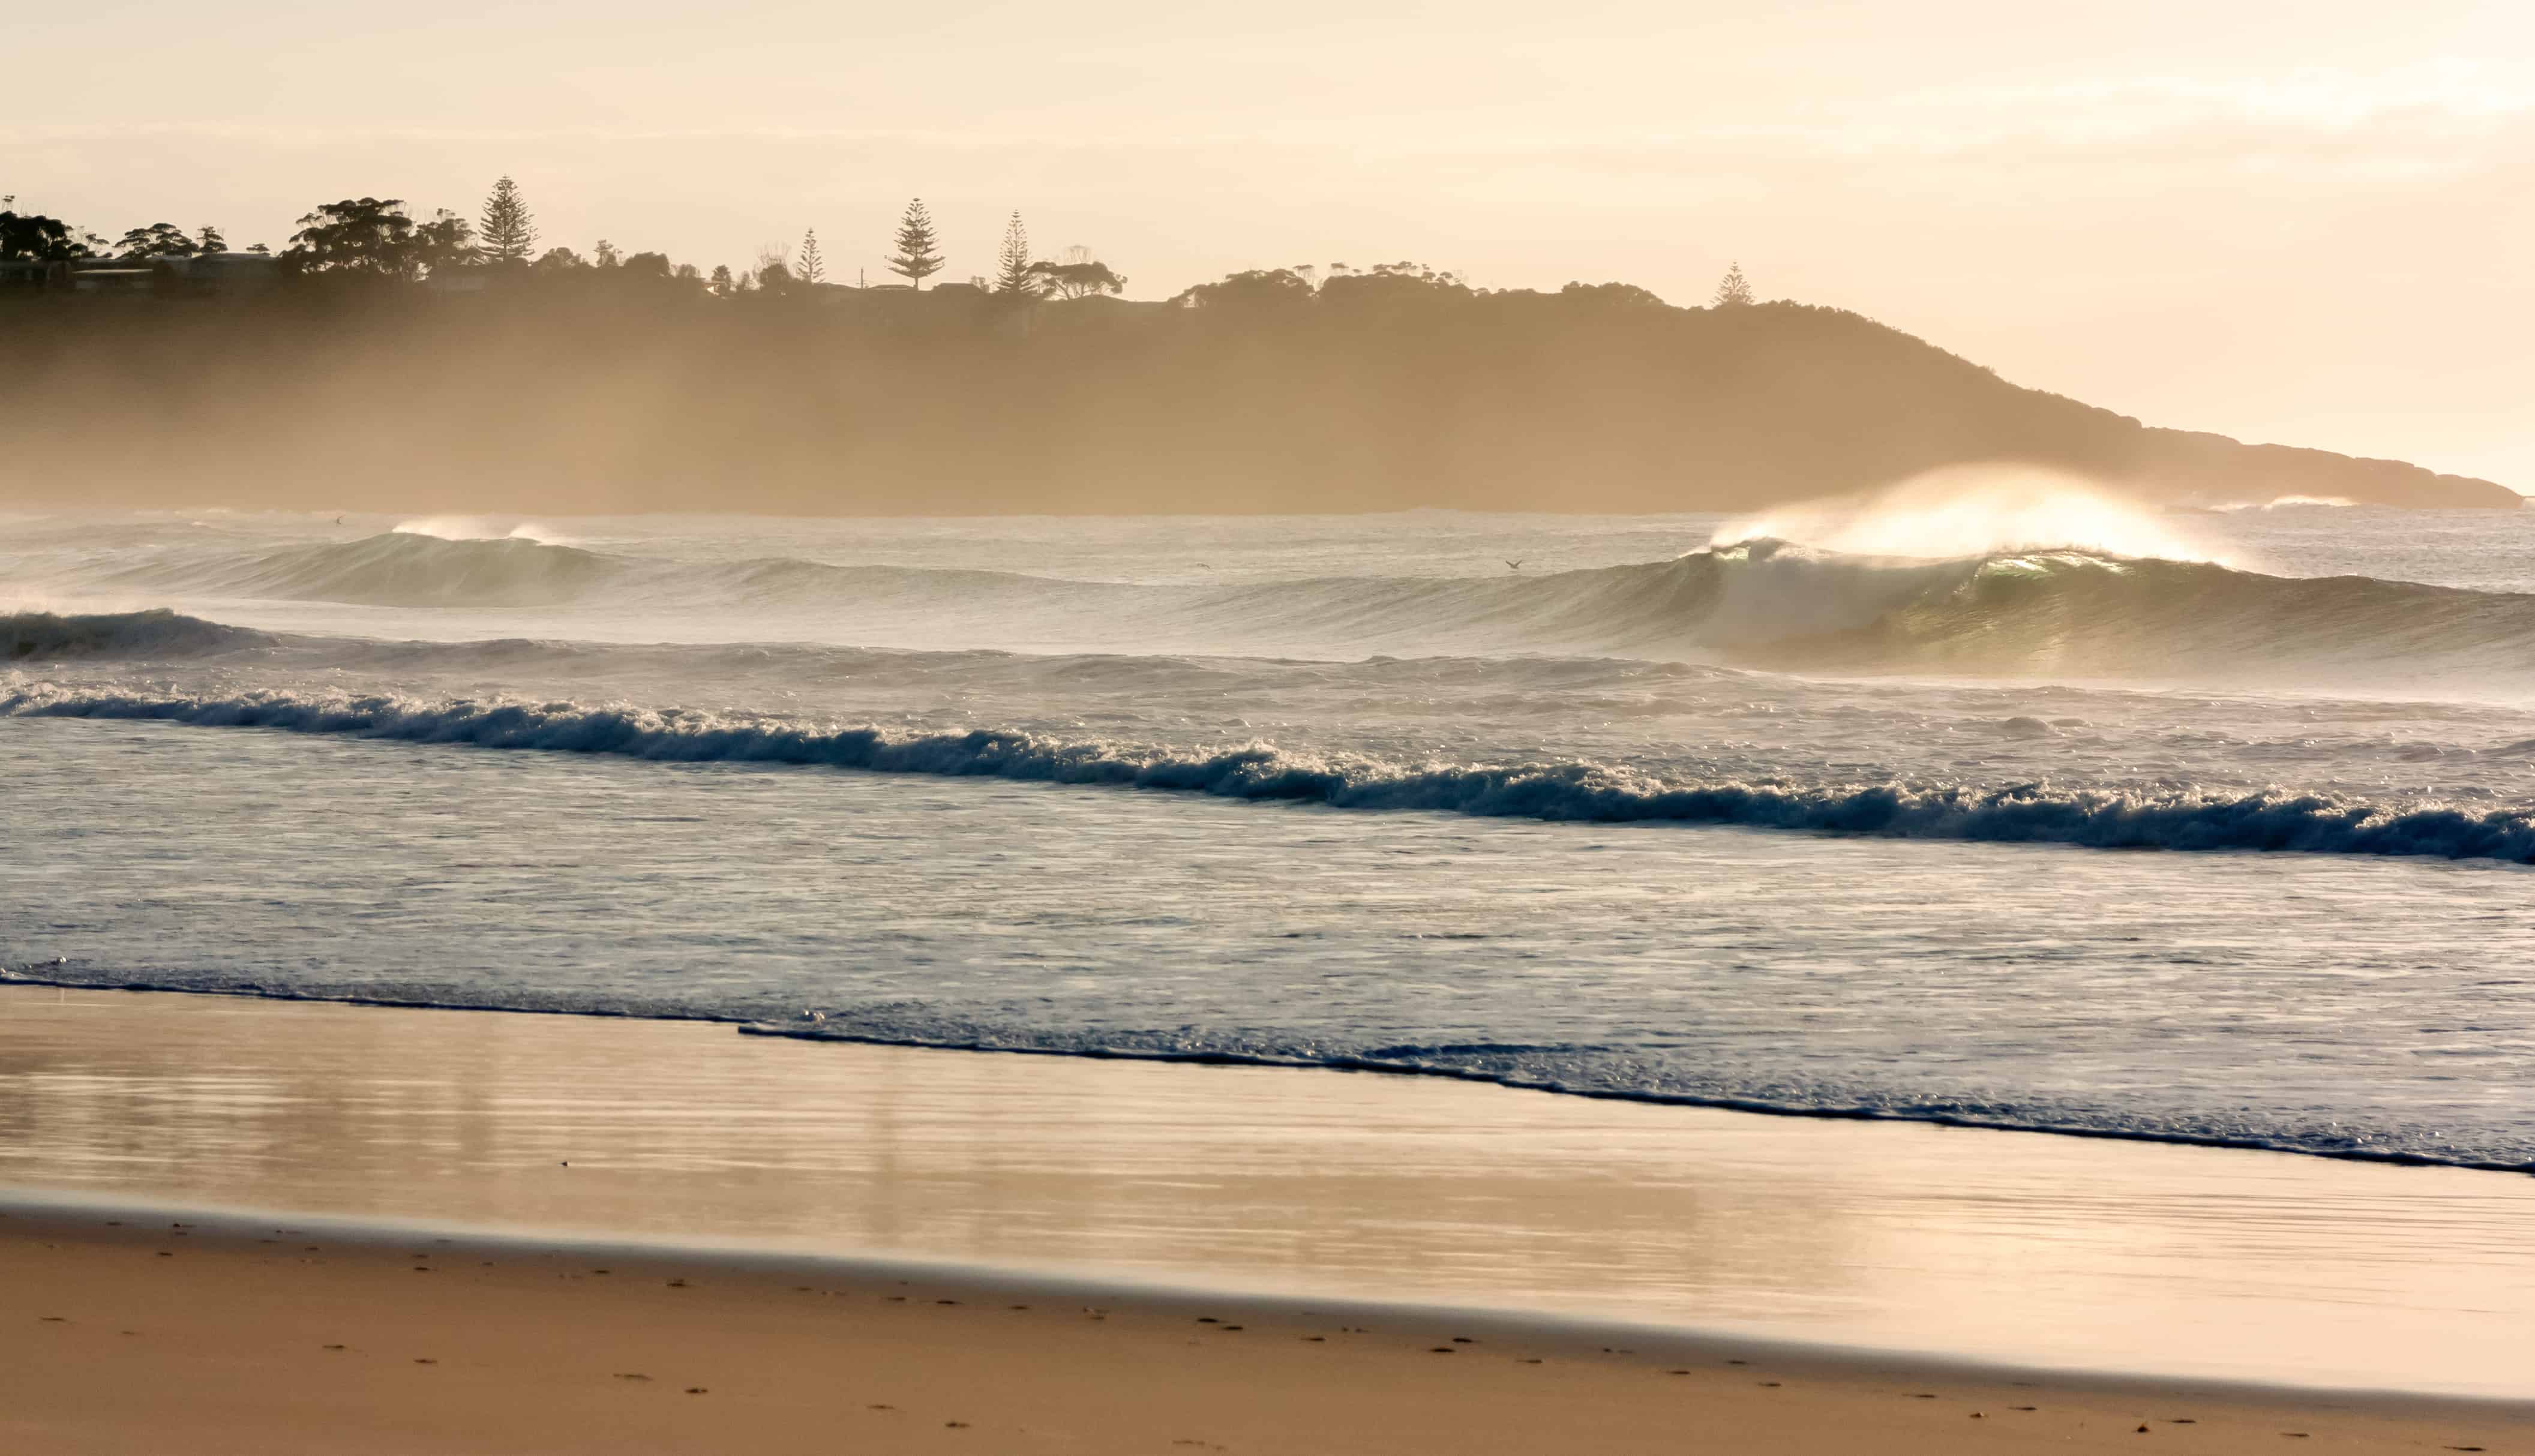 Mollymook Beach at Sunrise - the perfect Sydney Weekend away